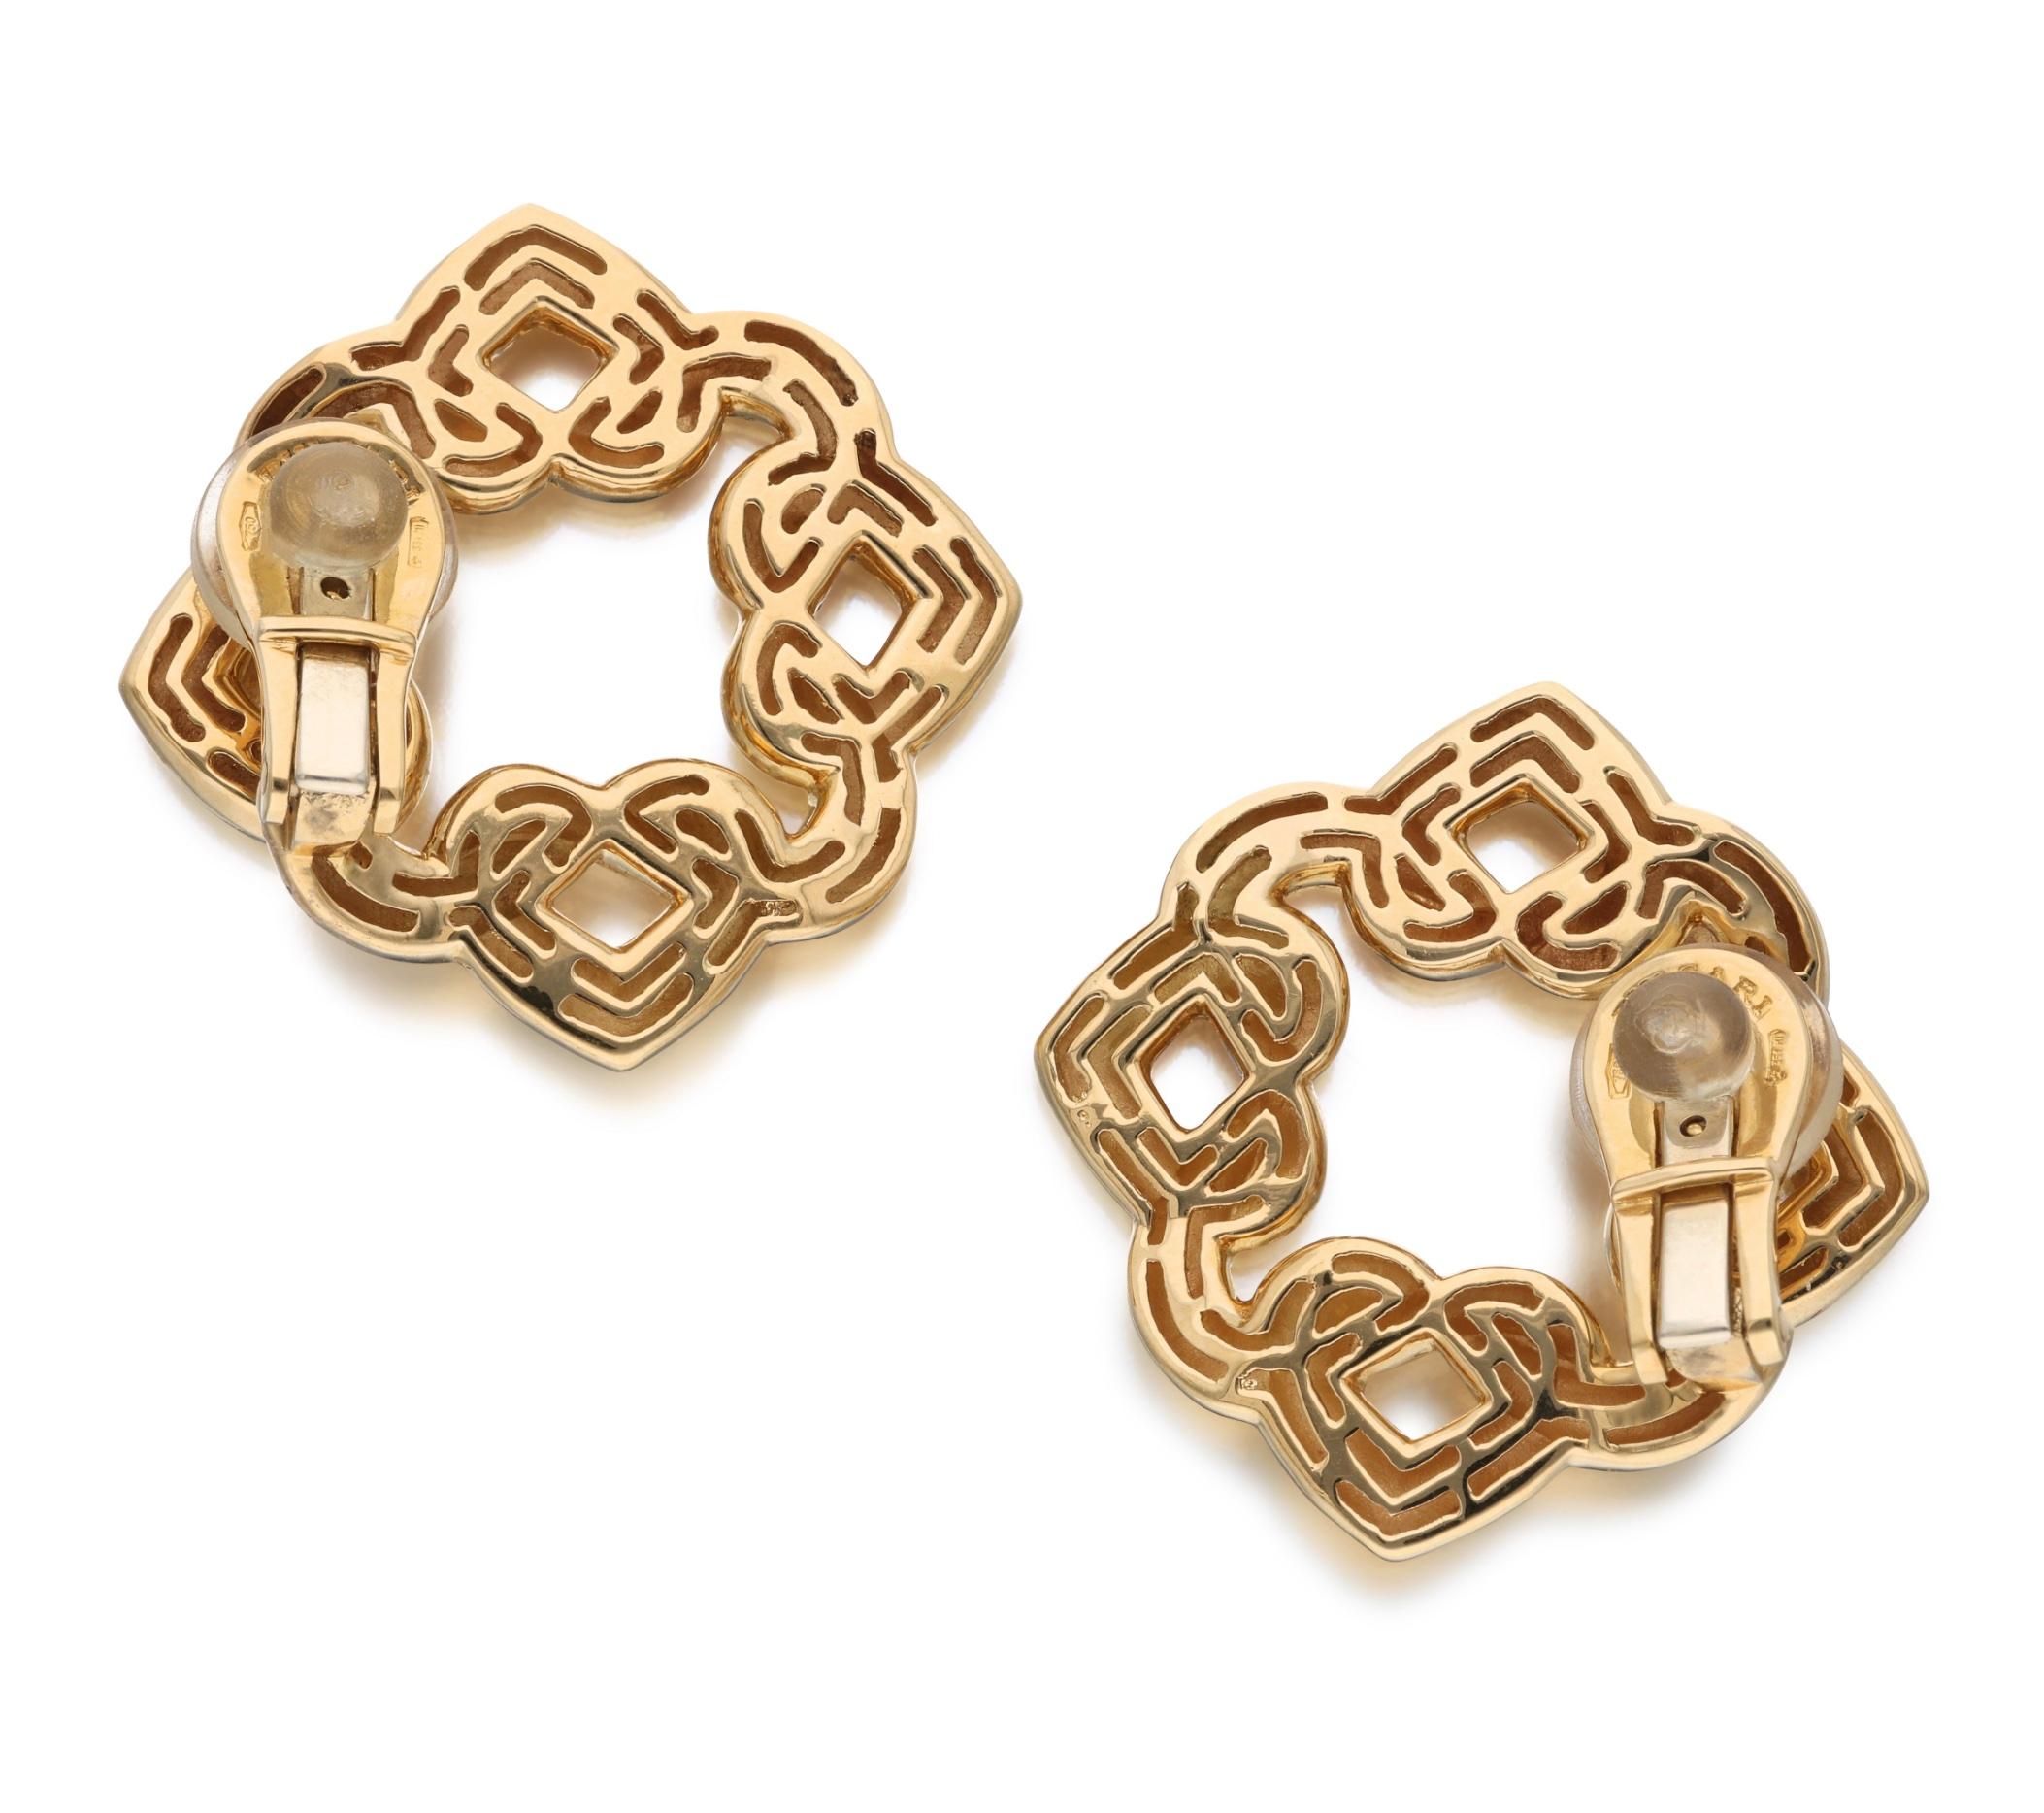 These creative ear clips are designed as interlocking gold hearts.

- Signed Bvlgari
- Italy
- 18 karat yellow gold
- Total weight 18.23 grams
- Length 1¼ inches, width 1¼ inches

The condition report is Very Good. 

Perfect for casual settings. 